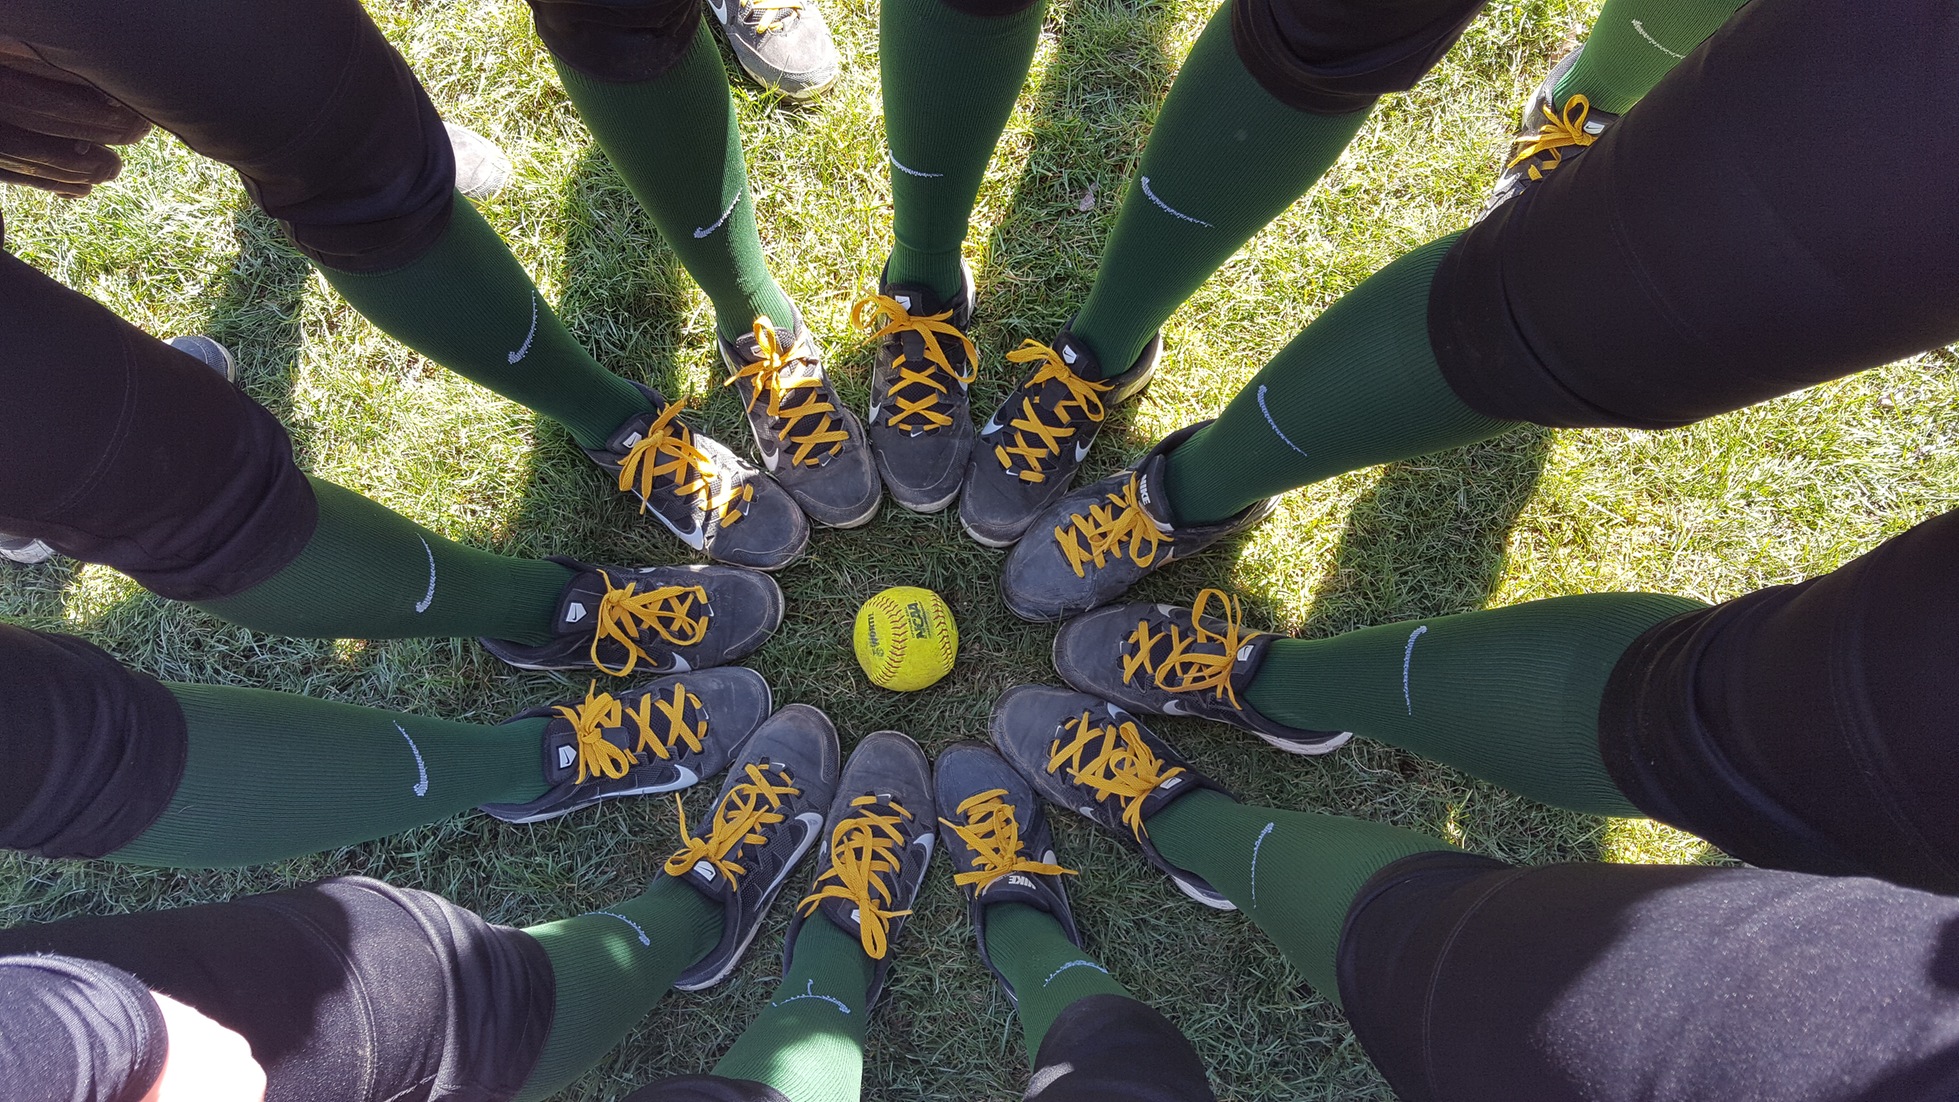 Join Sage's Softball Team as They Lace up 4Pedriatric Cancer in 2017!